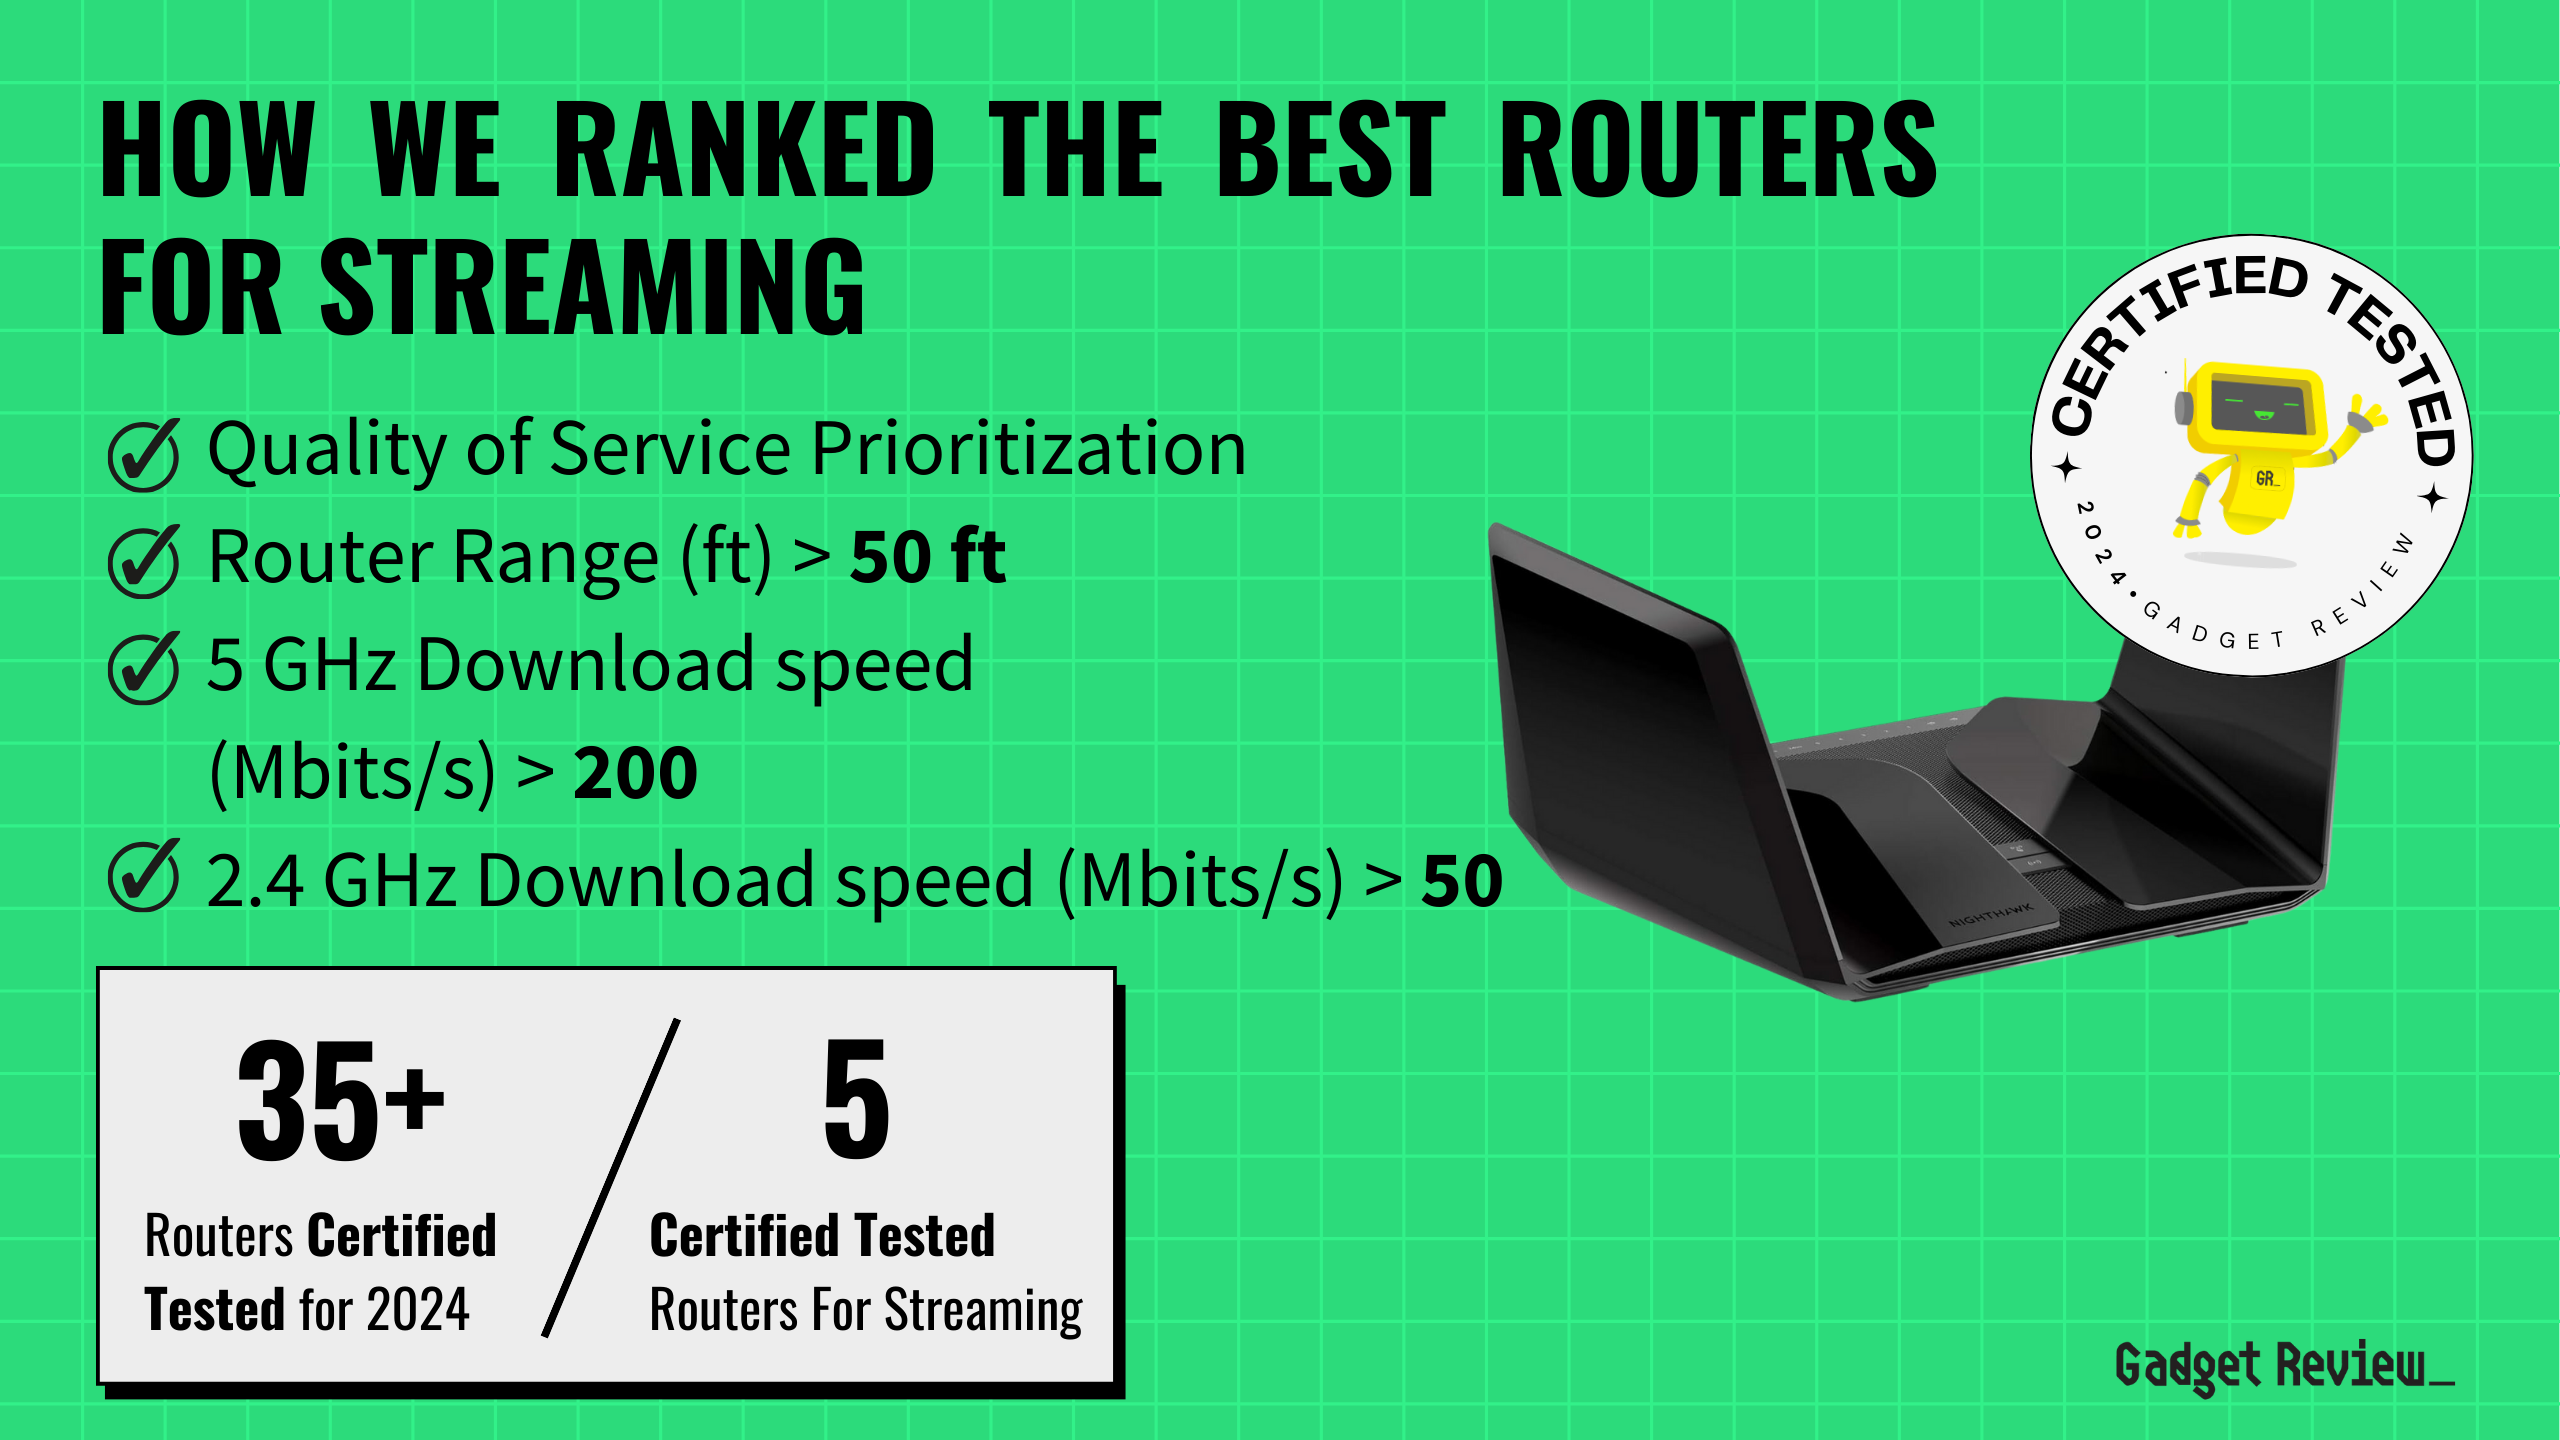 best routers streaming guide that shows the top best router model